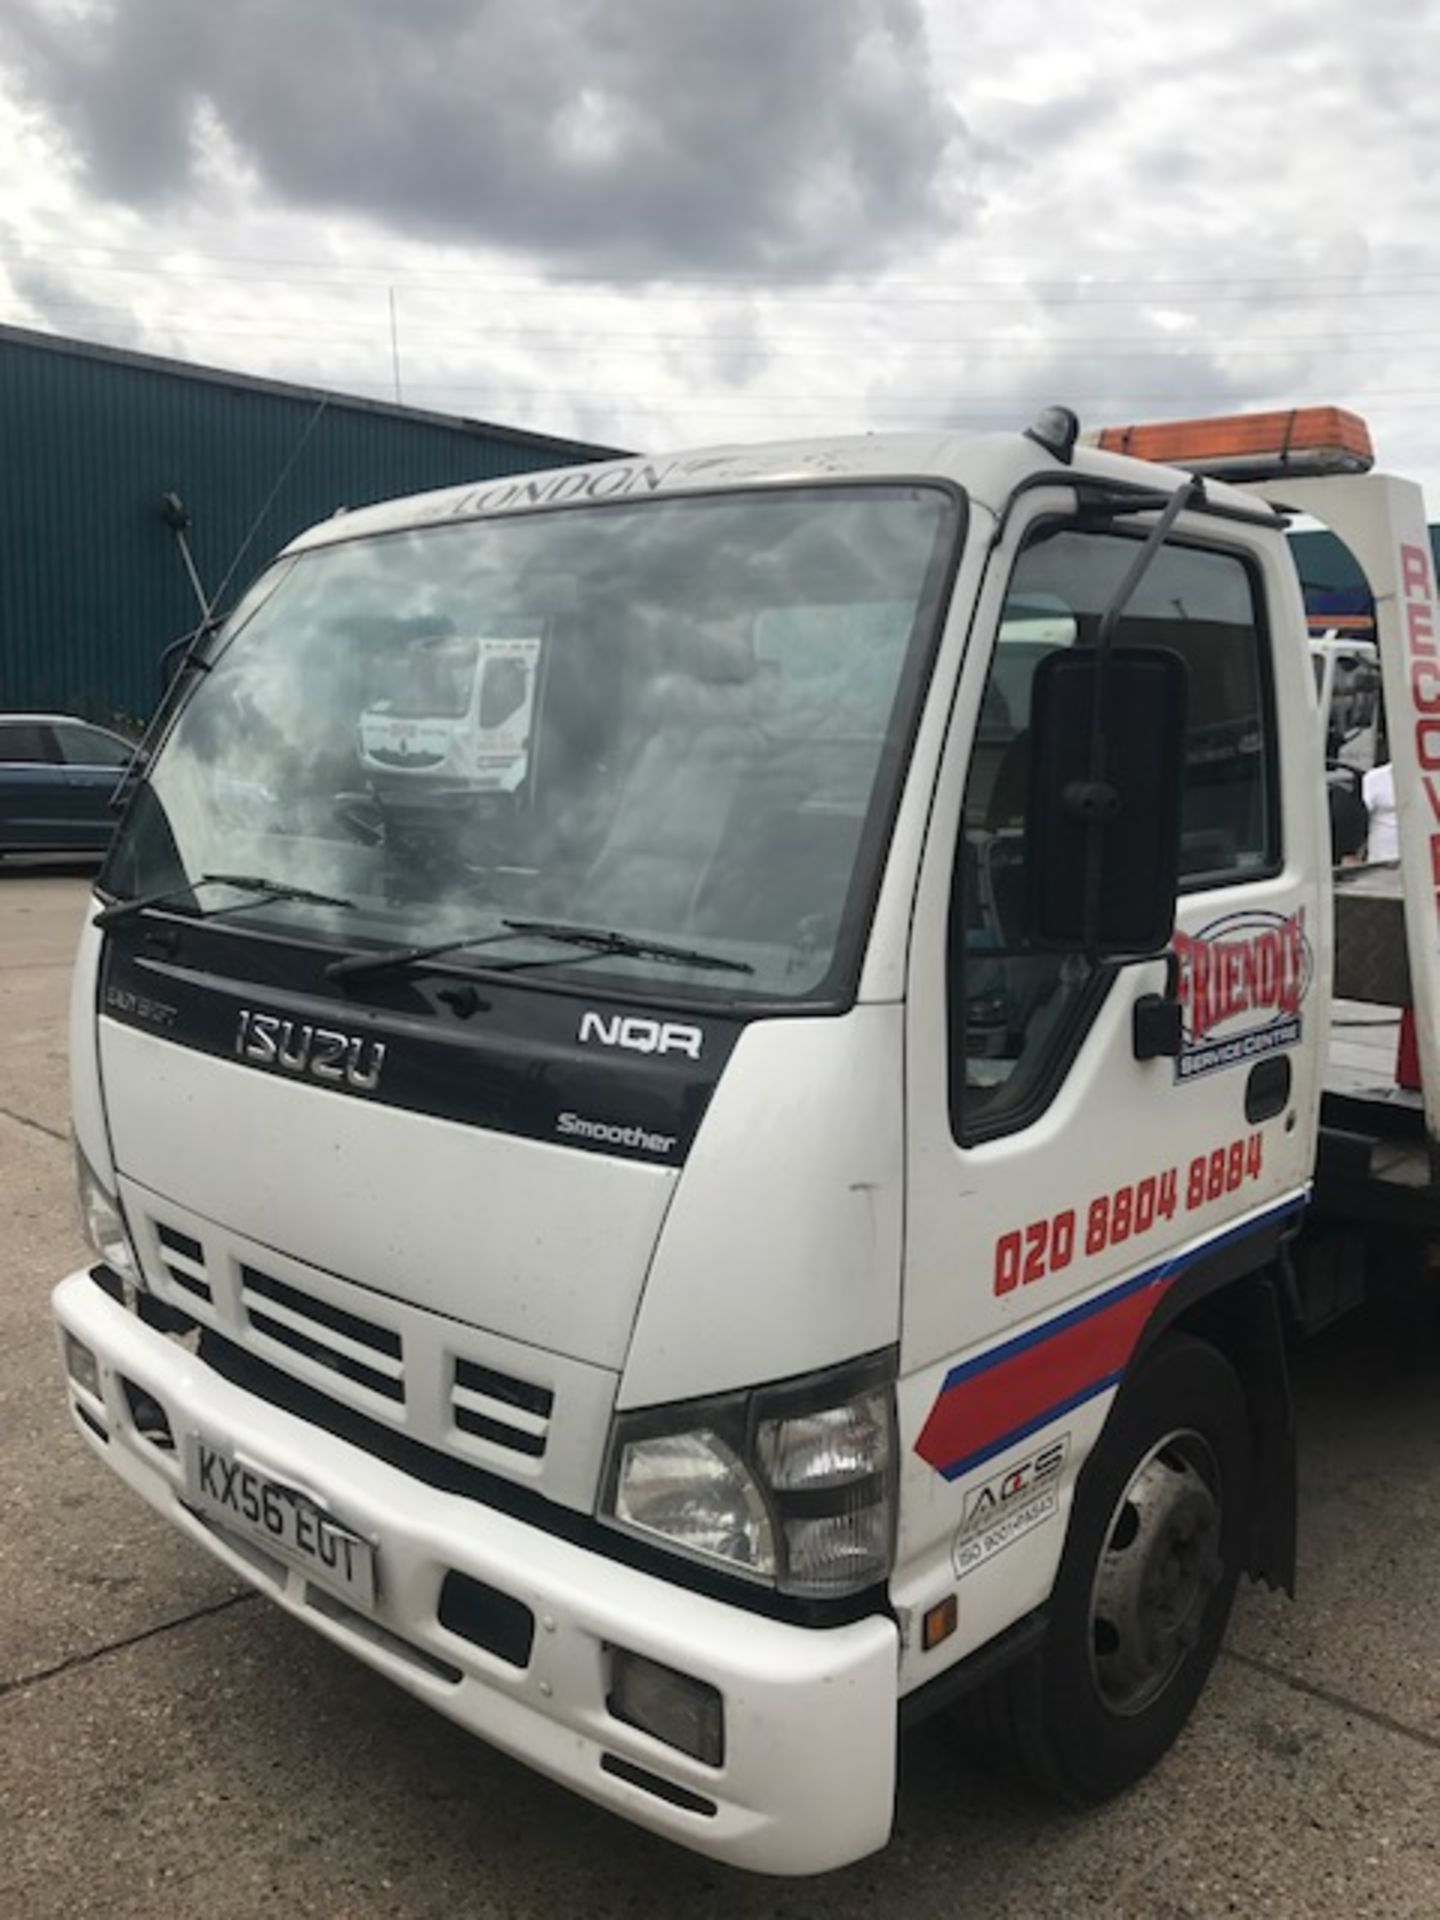 2006 Isuzu NQR 70 7.5T Easyshift breakdown recovery vehicle complete with Powertec body, winch and - Image 3 of 10